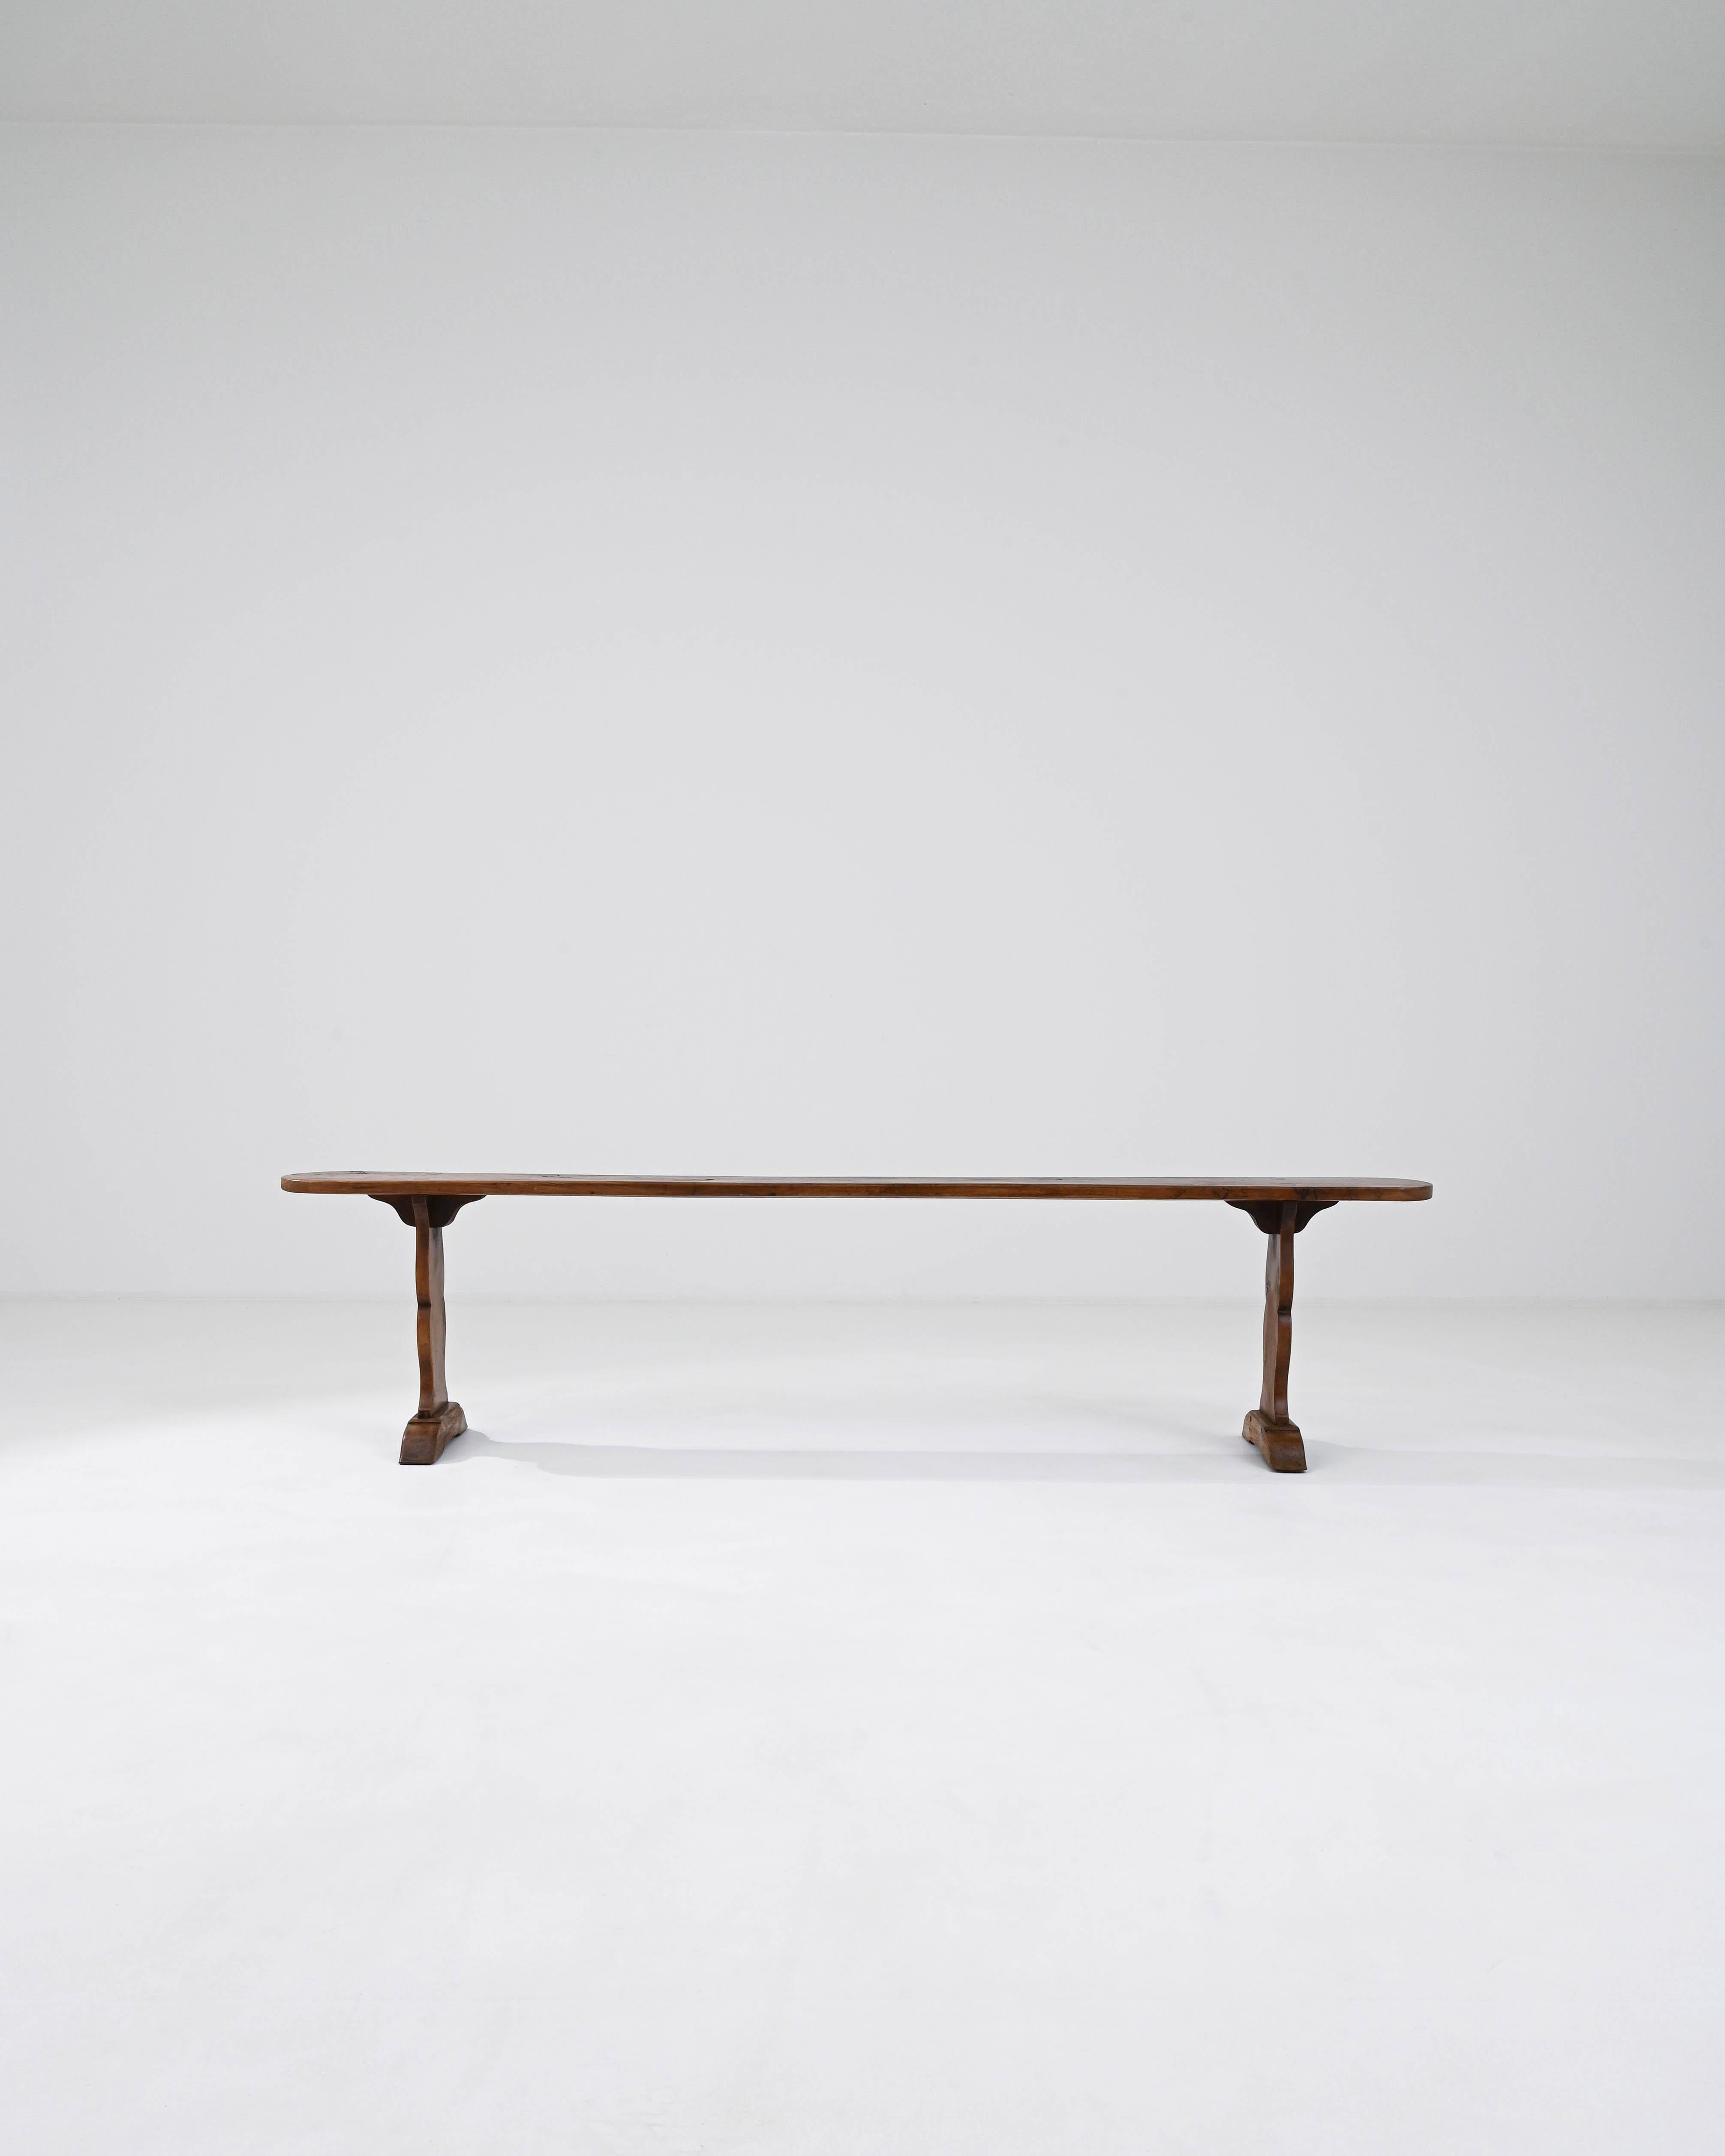 This 19th Century French Wooden Bench is an embodiment of rustic elegance and historical charm. Crafted from solid wood, it stands testament to the craftsmanship of the era with its sturdy trestle base and gracefully curved legs that anchor it